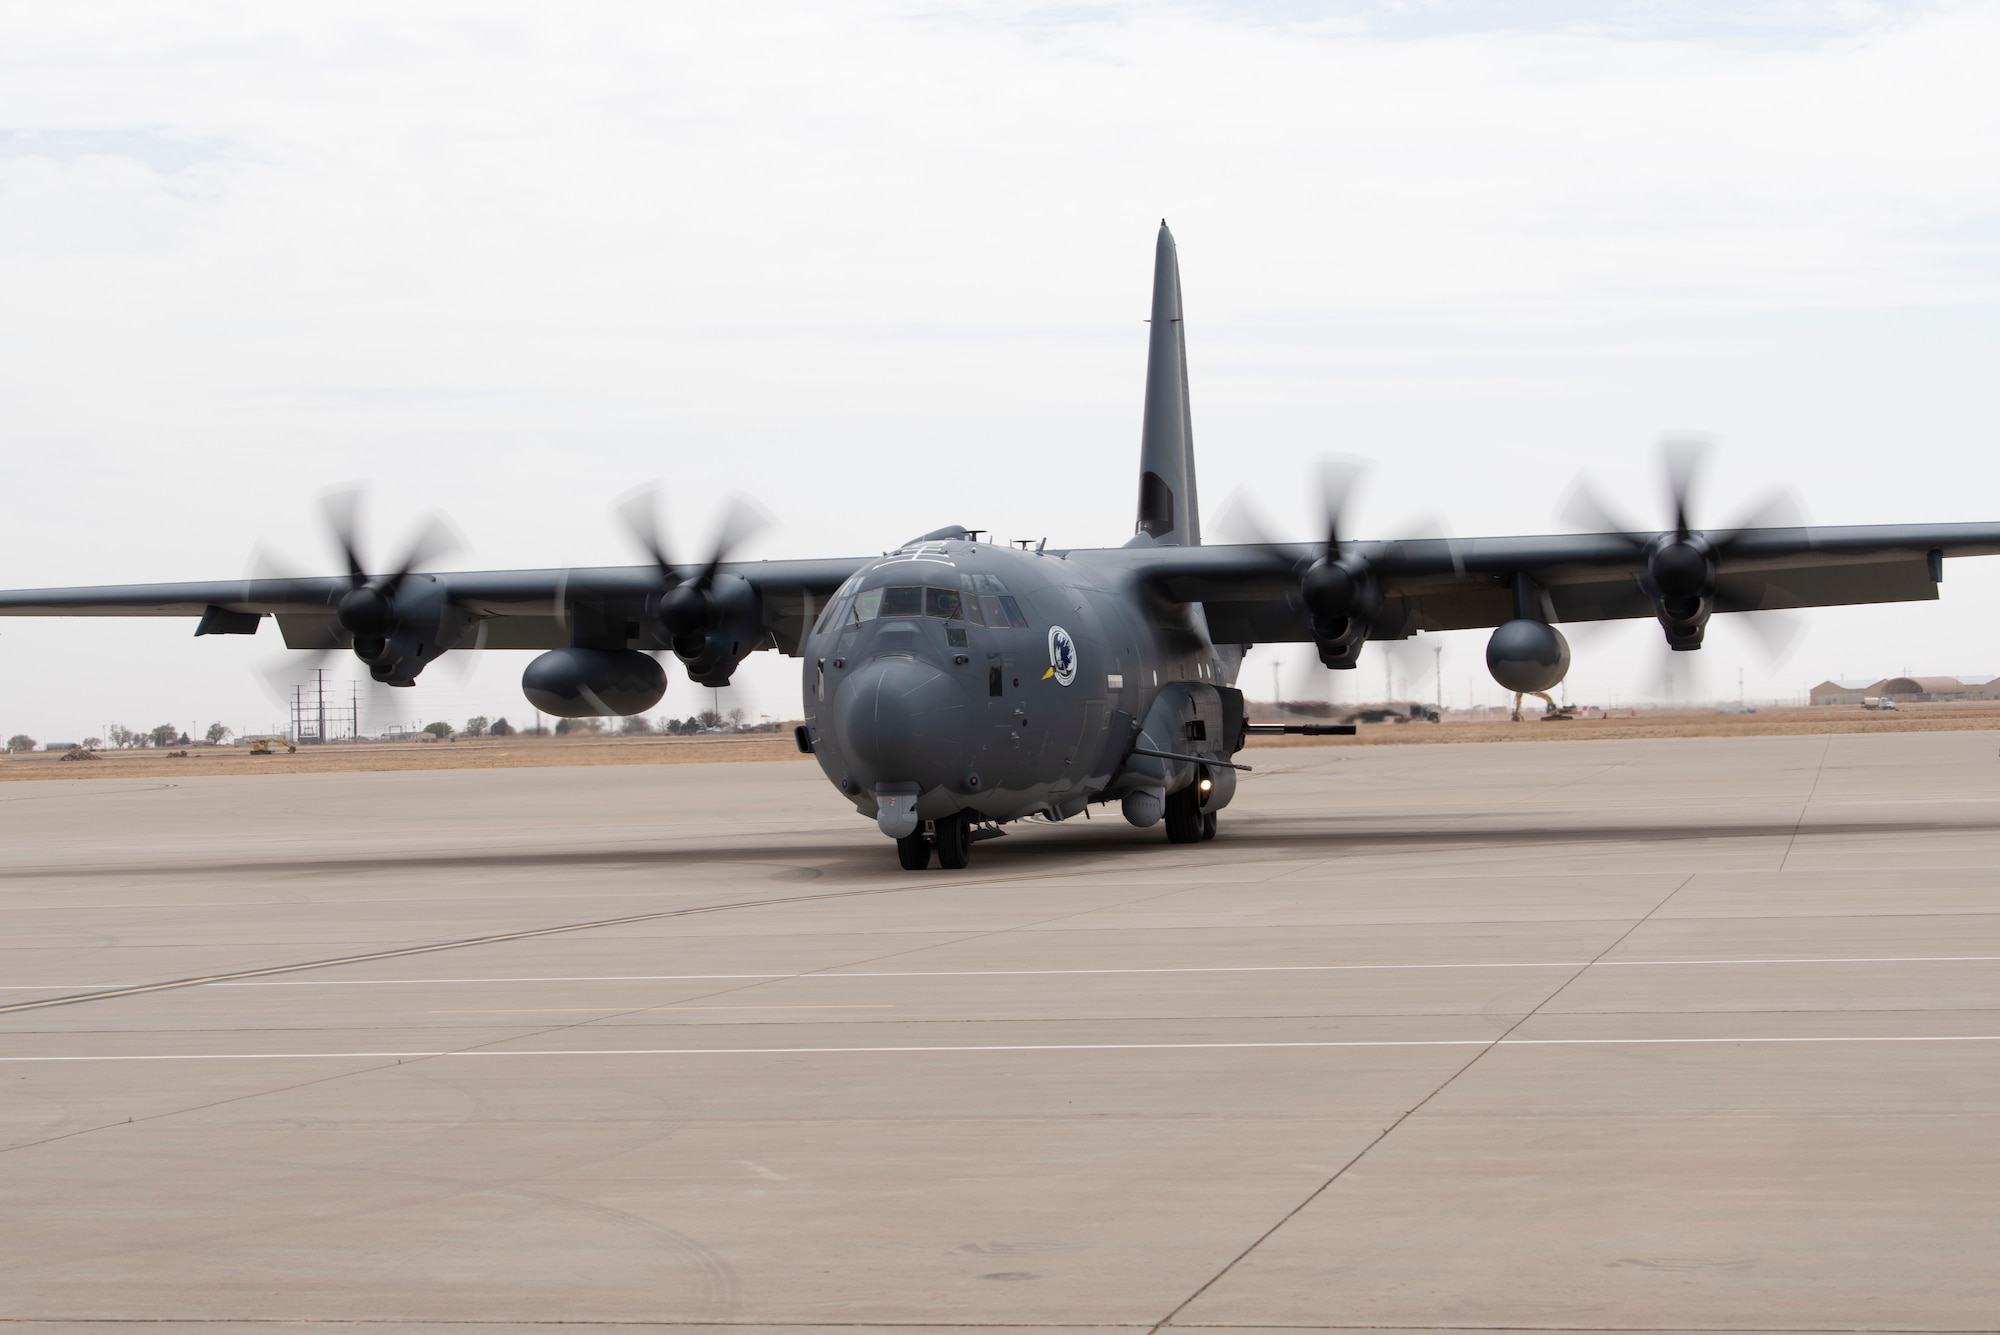 A U.S. Air Force 16th Special Operations Squadron AC-130J Ghostrider arrives at Cannon Air Force Base, New Mexico, April 18, 2022. The arrival of the AC-130J Ghostrider represents a significant expansion of force generation capacity as the Air Force Special Operations Command structures for the reemergence of great power competition, demanding significant transformation to ensure Air Commandos are ready to successfully operate in full-spectrum operations. (U.S. Air Force photo by Airman 1st Class Cassidy Thomas) (This photo has been altered for security purposes by blurring out identification numbers and equipment)